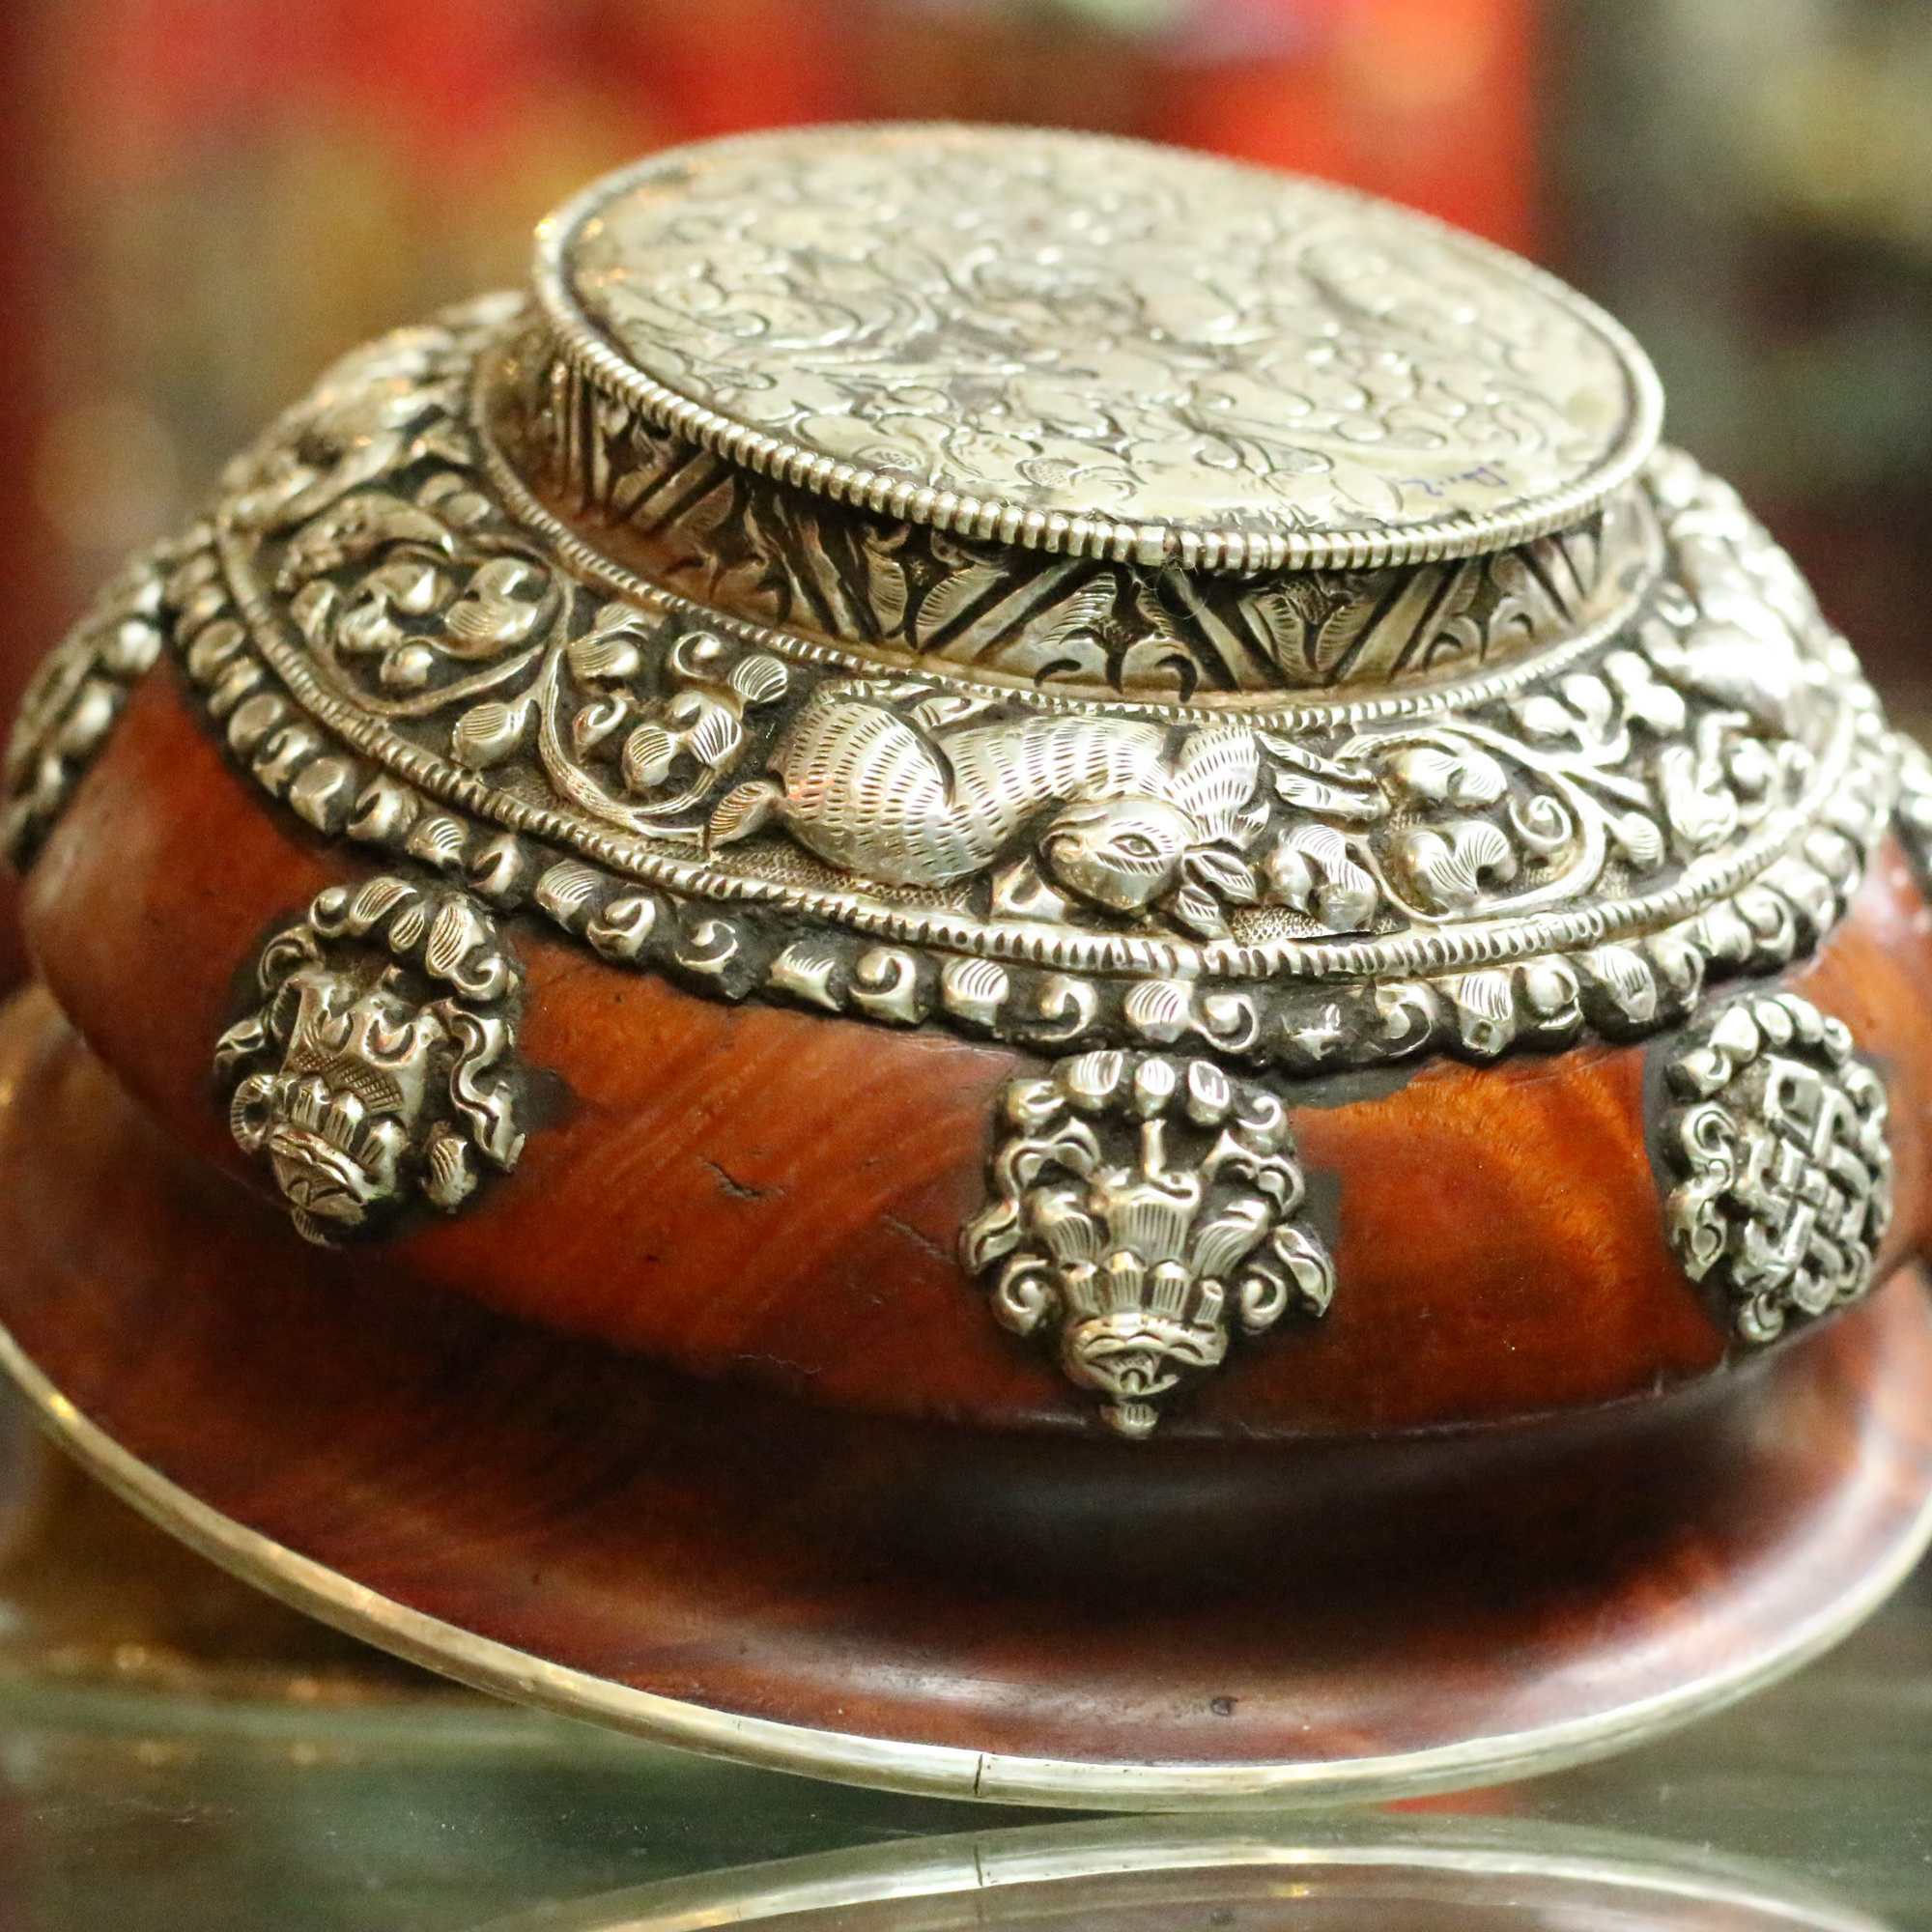 Bhutanese Wooden Offering Bowl, With Sterling Silver Plate With Carving, sold